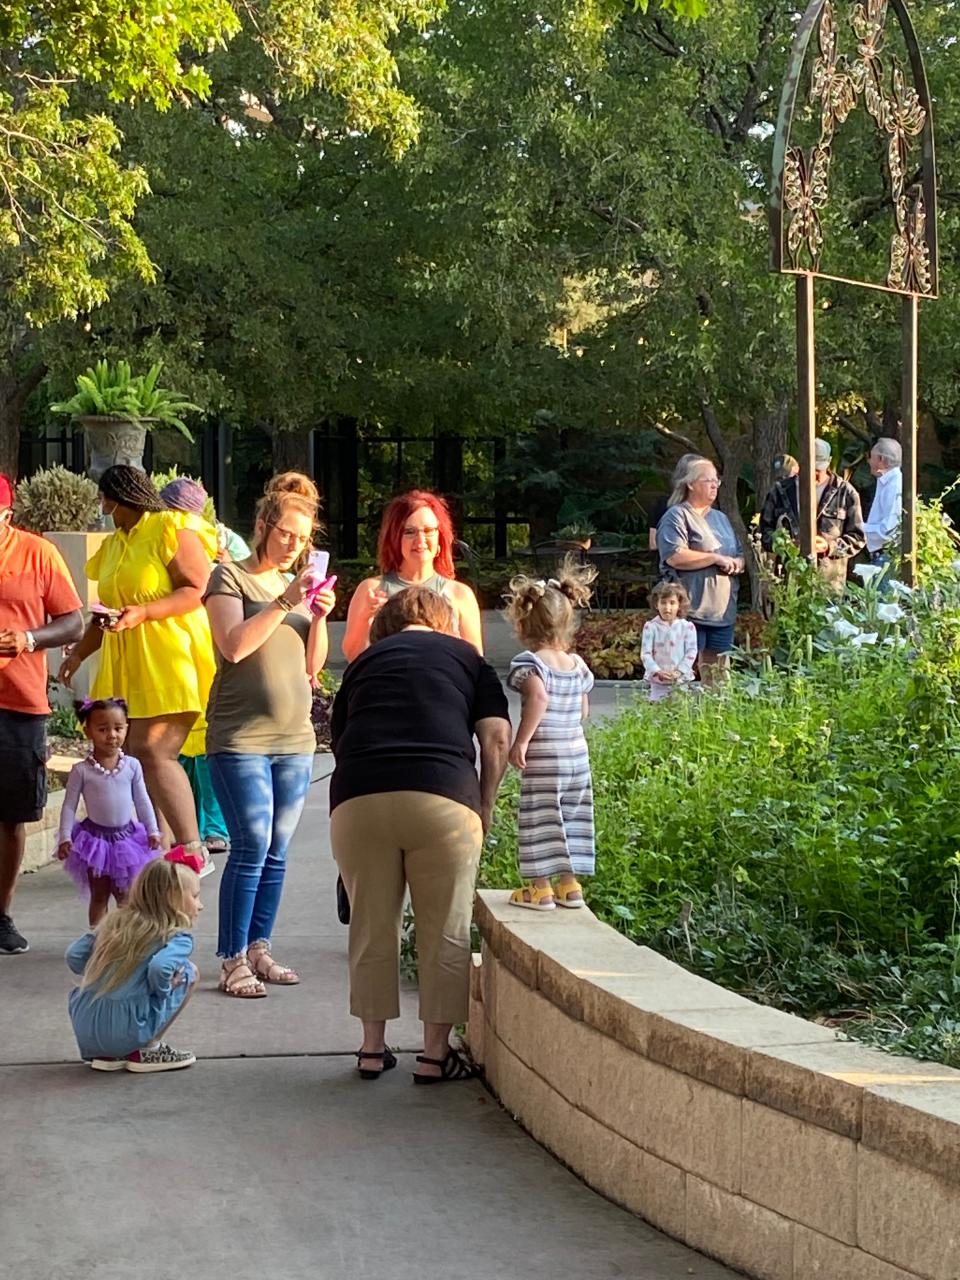 The Amarillo Botanical Gardens invites the community to experience "A Day with the Butterflies," an expansion of their annual breakfast event, scheduled to include the traditional breakfast, and butterfly releases as well as live music, food trucks, vendors, arts and crafts, educational demonstrations and more on Saturday.